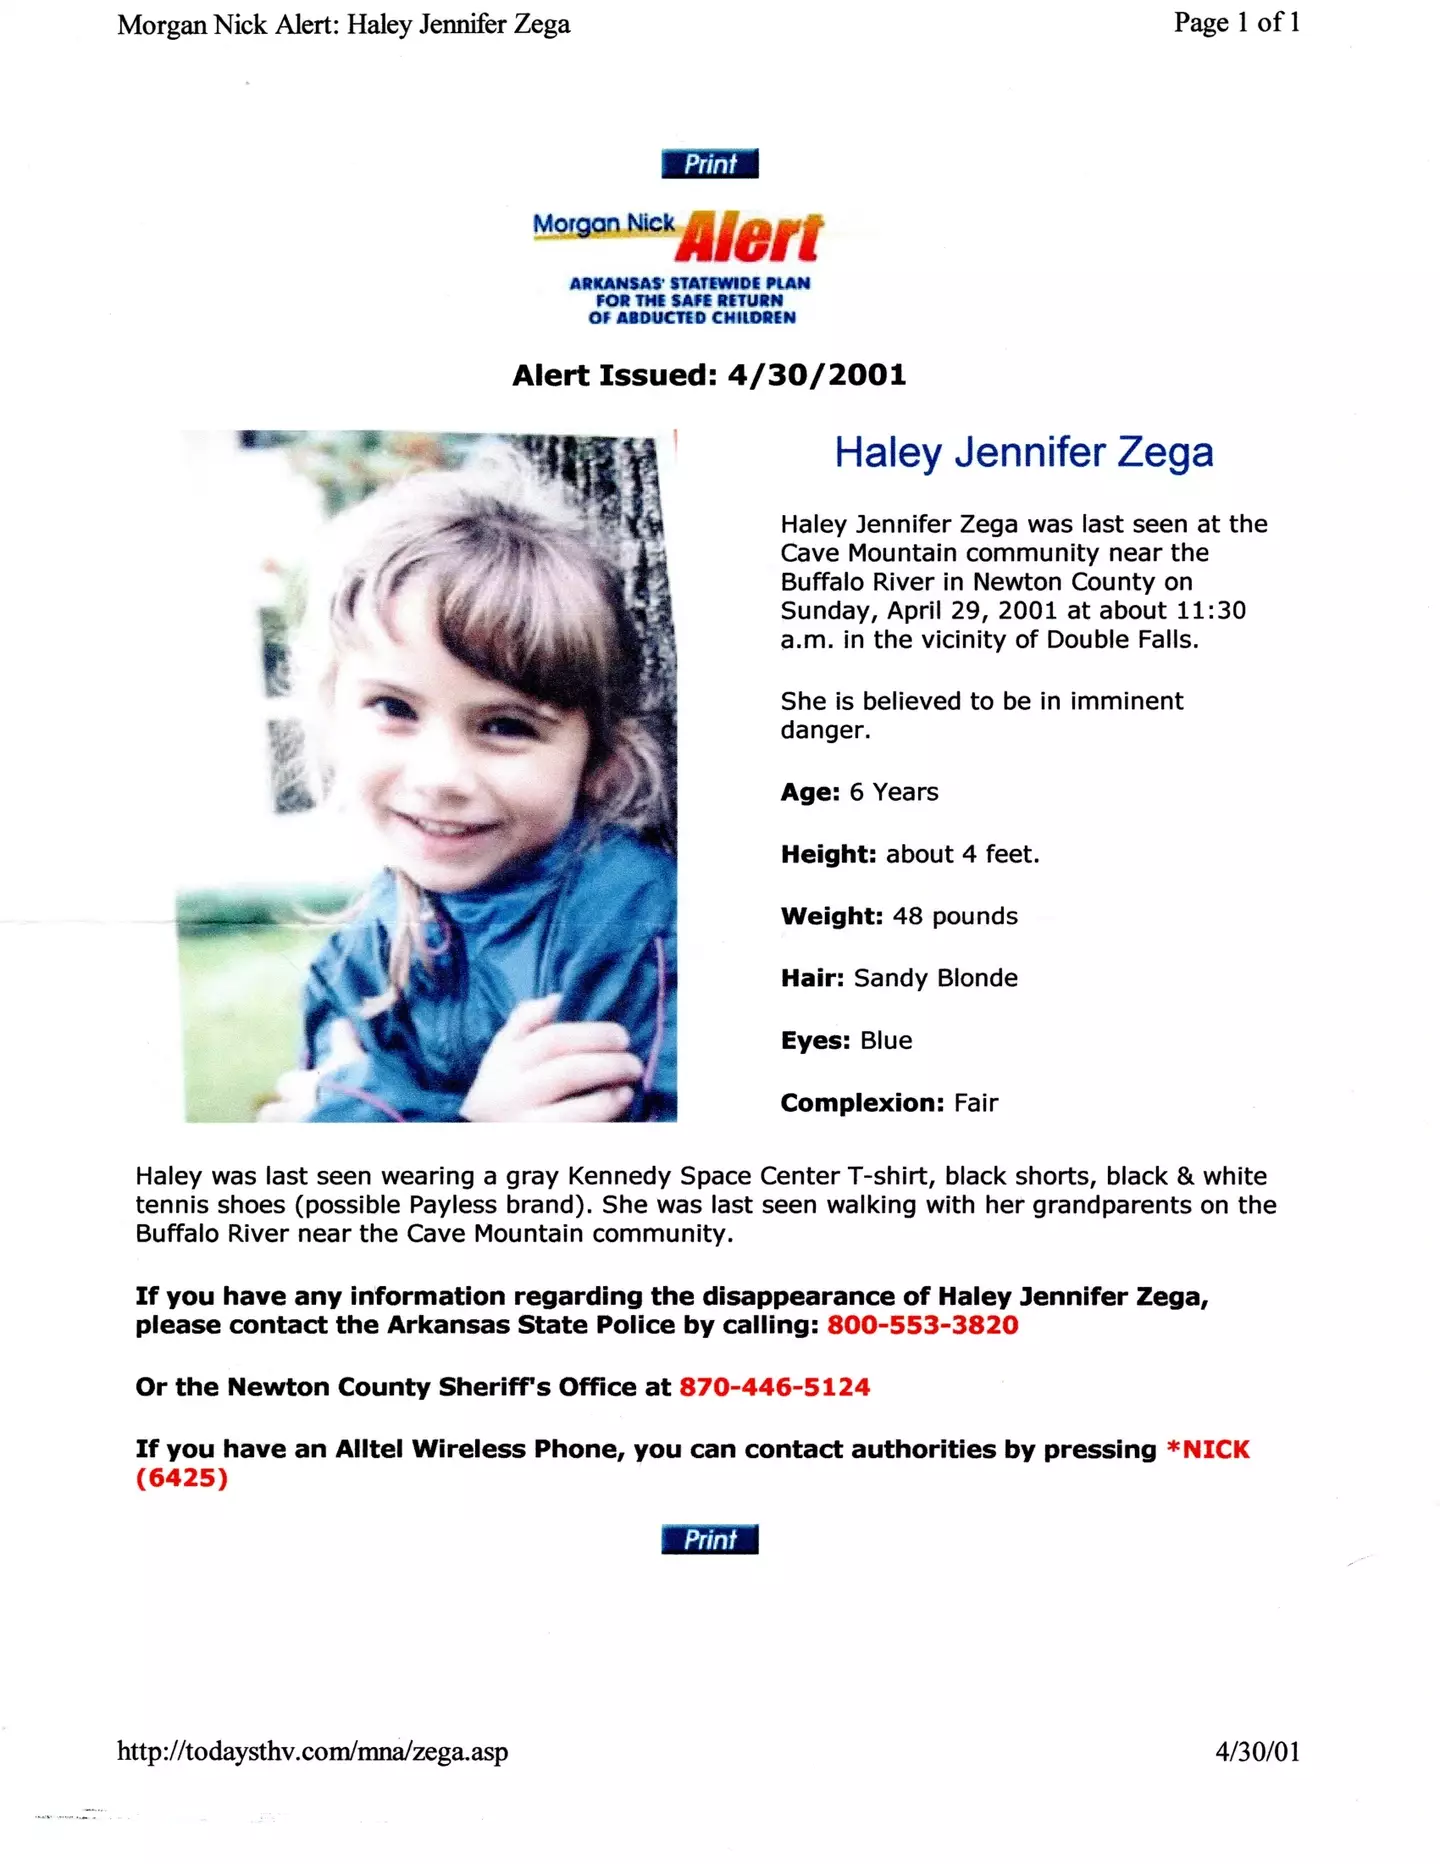 Zega was missing for a total of 52 hours.